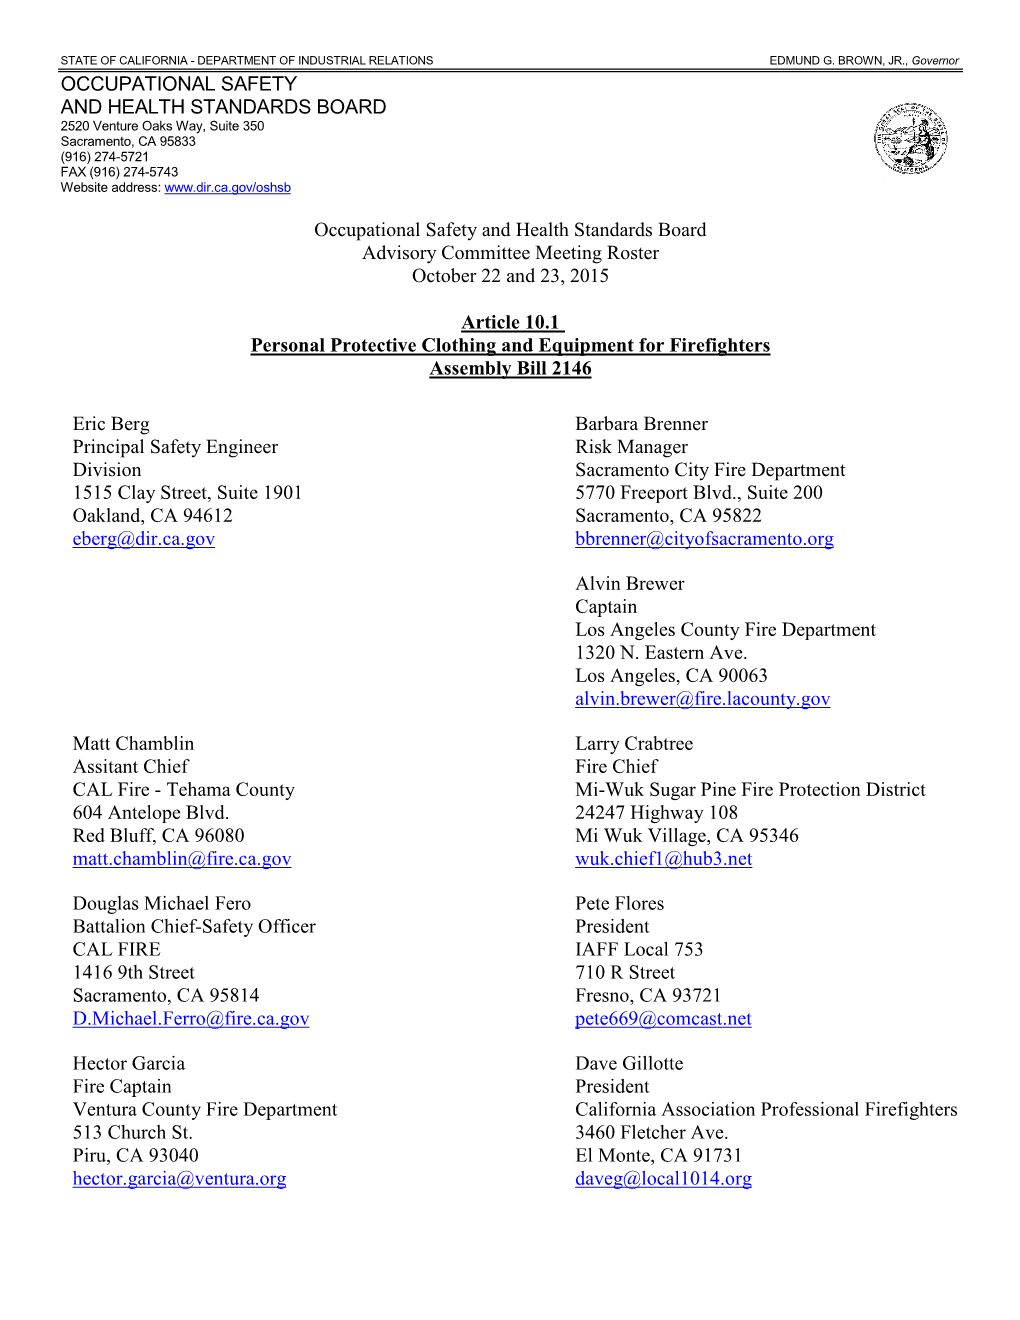 Occupational Safety and Health Standards Board Advisory Committee Meeting Roster October 22 and 23, 2015